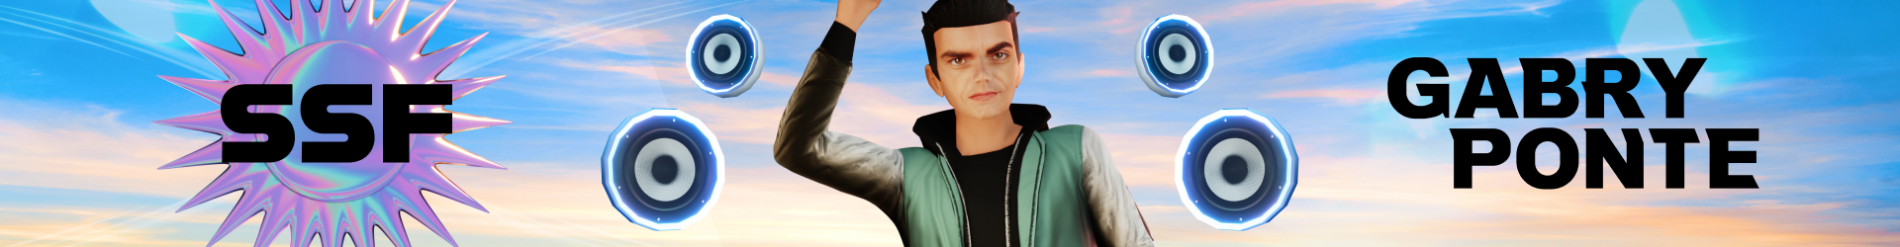 GABRY PONTE IS THE HEADLINER OF AVAKIN LIFE'S SOLAR SOUNDS FESTIVAL